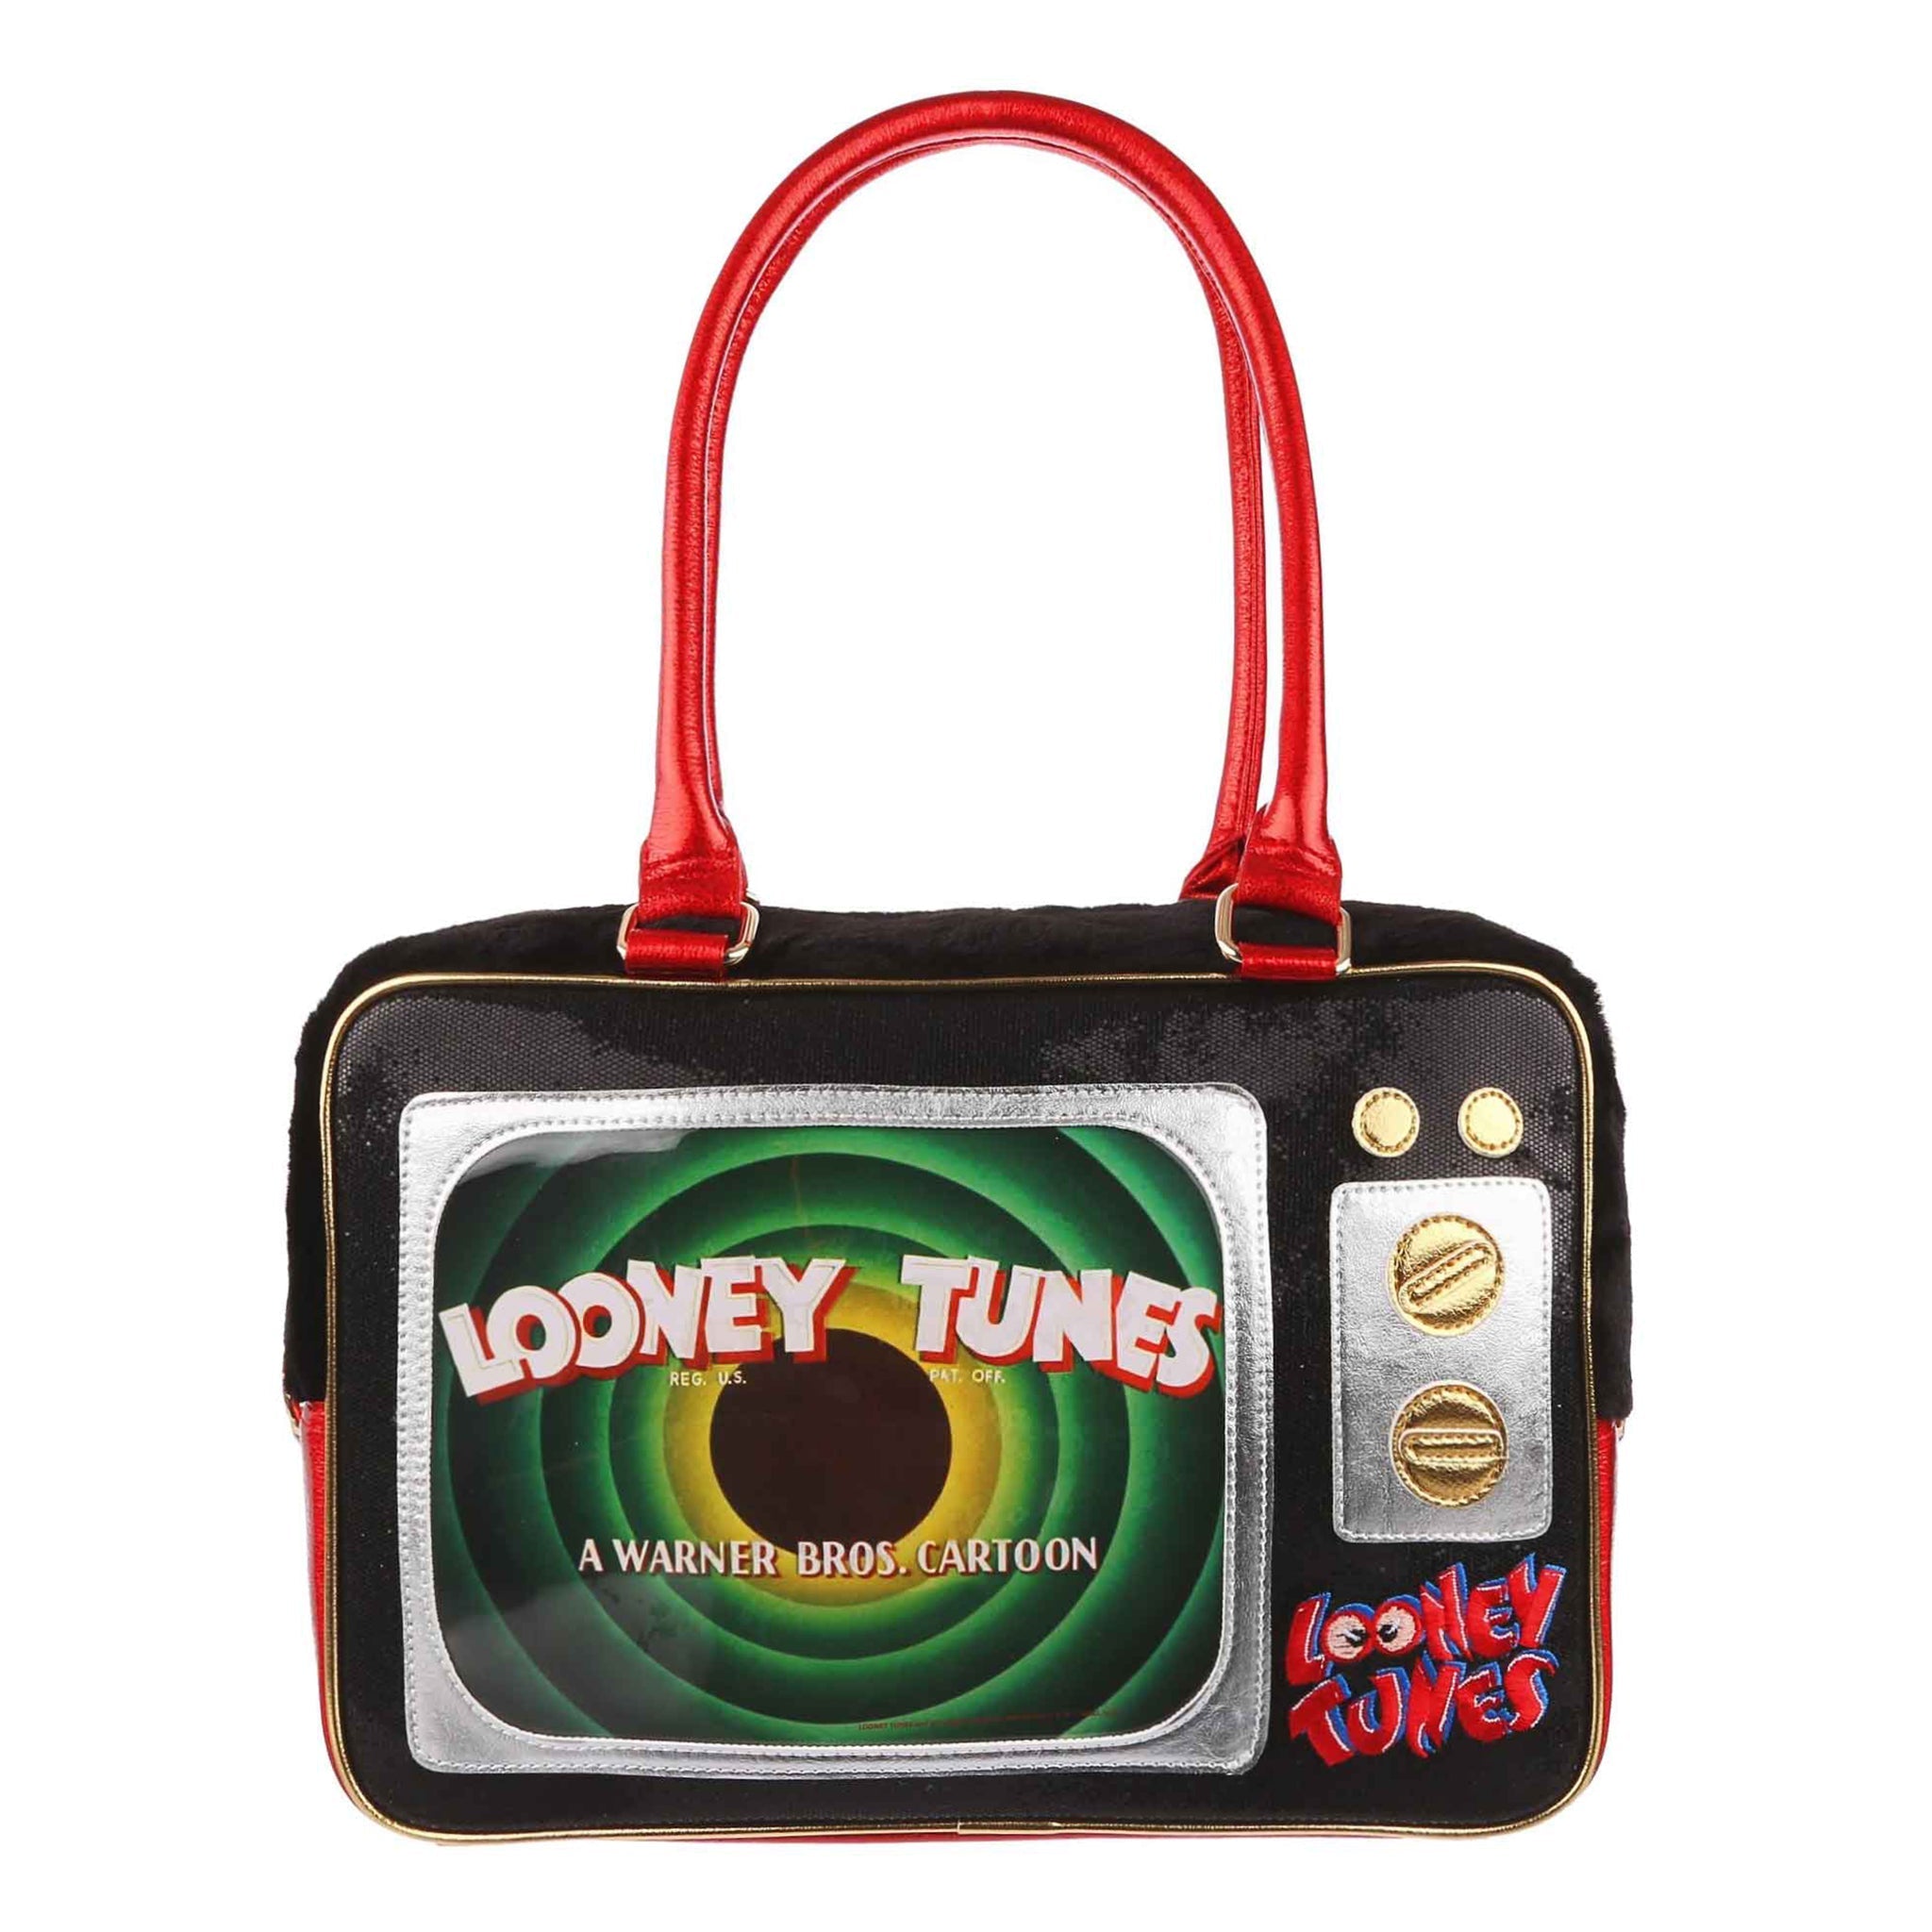 Rectangle zip bag has gold and silver applique to look like a TV, with changesble 'screens' that slide in and out at the front. With red embroidered Looney Tunes logo in the bottom right corner and matching red handles.